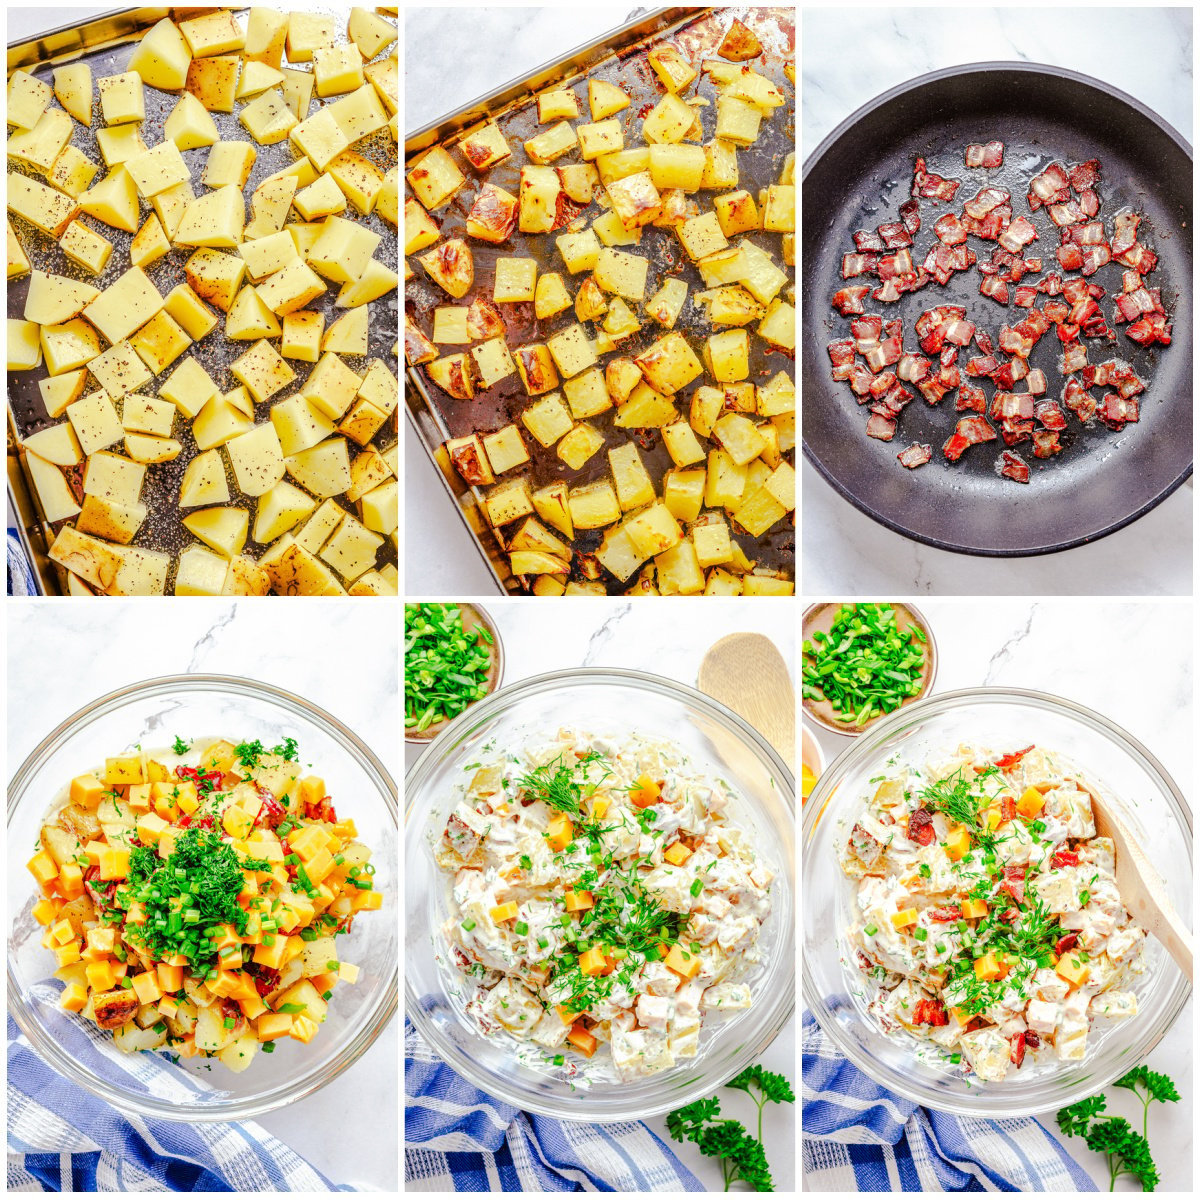 Step by step photos on how to make Bacon Ranch Potato Salad